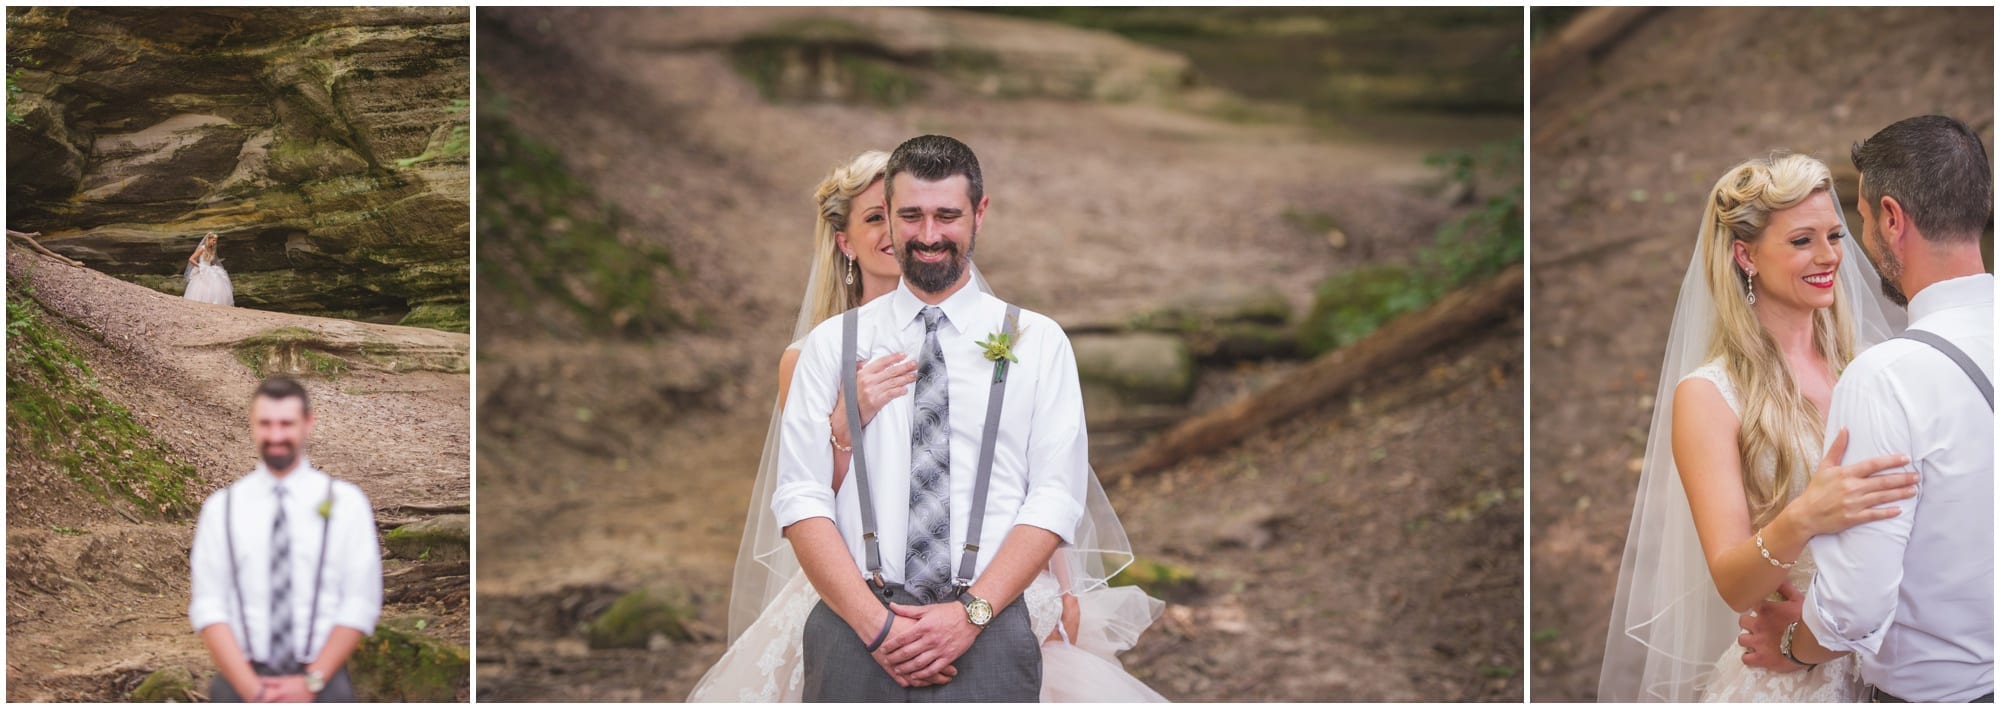 Starved Rock State Park Lodge Wedding Photographer Bride and Groom Portrait of reveal in Canyon 